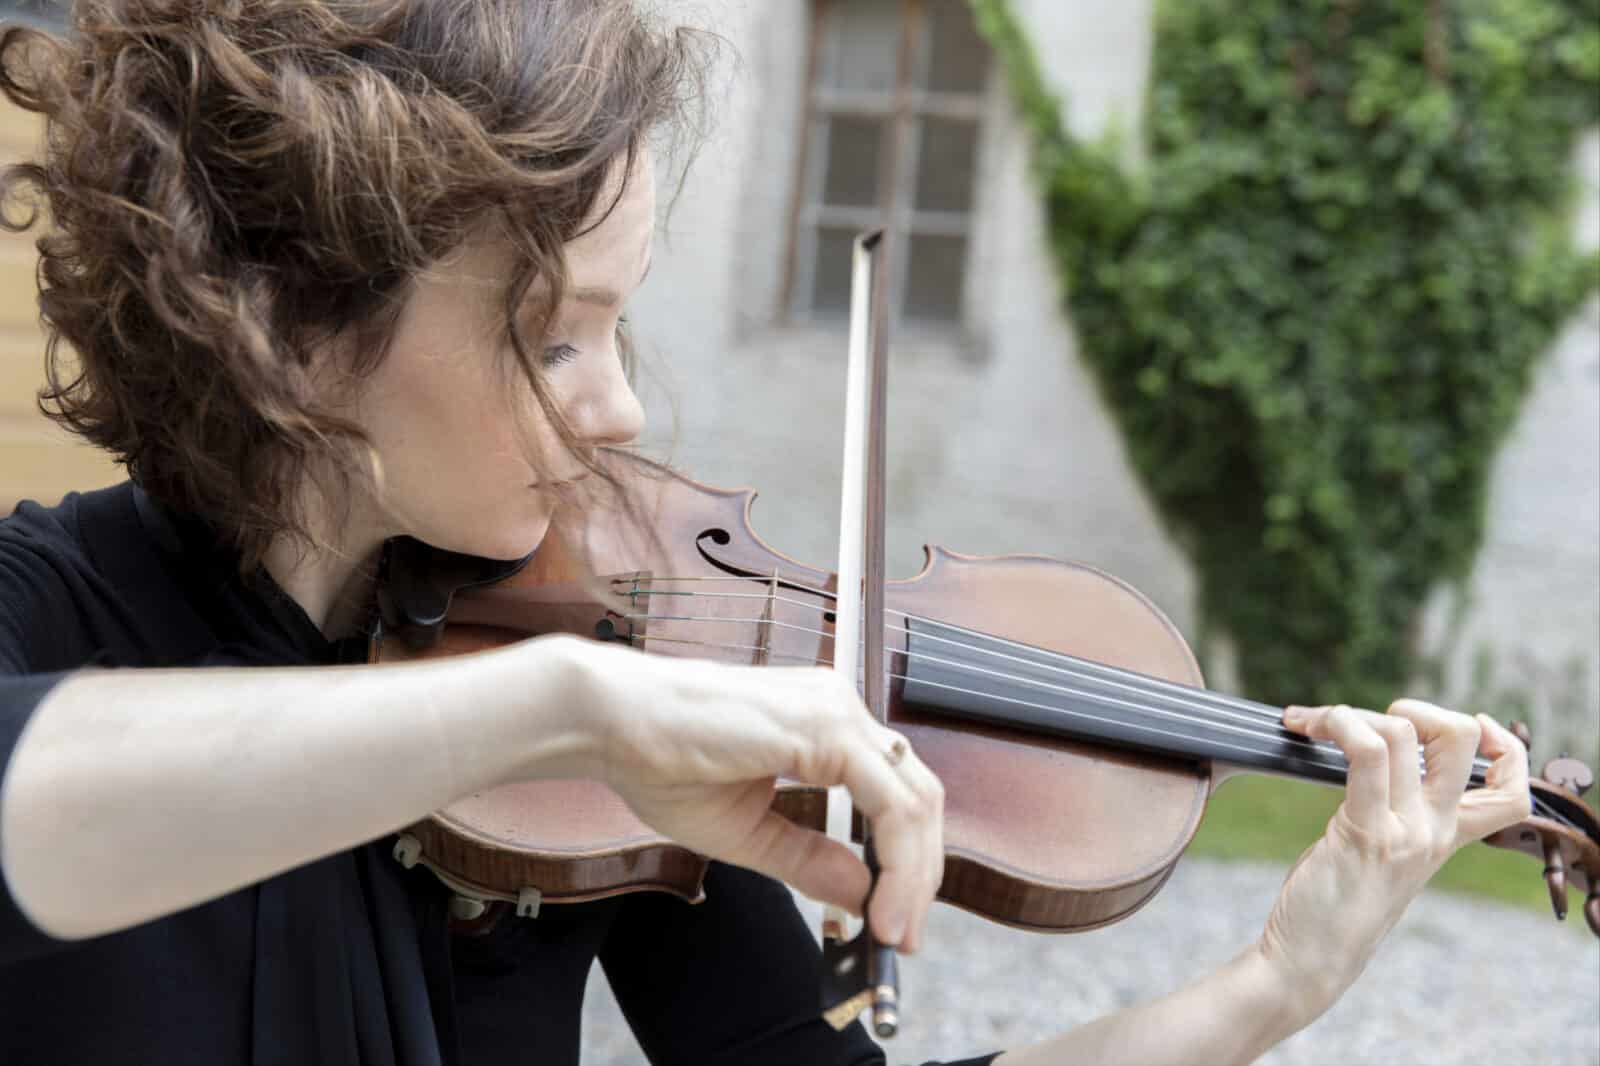 Acclaimed violinist Hilary Hahn bows her instrument in the sun. Press photo courtesy of the artist.